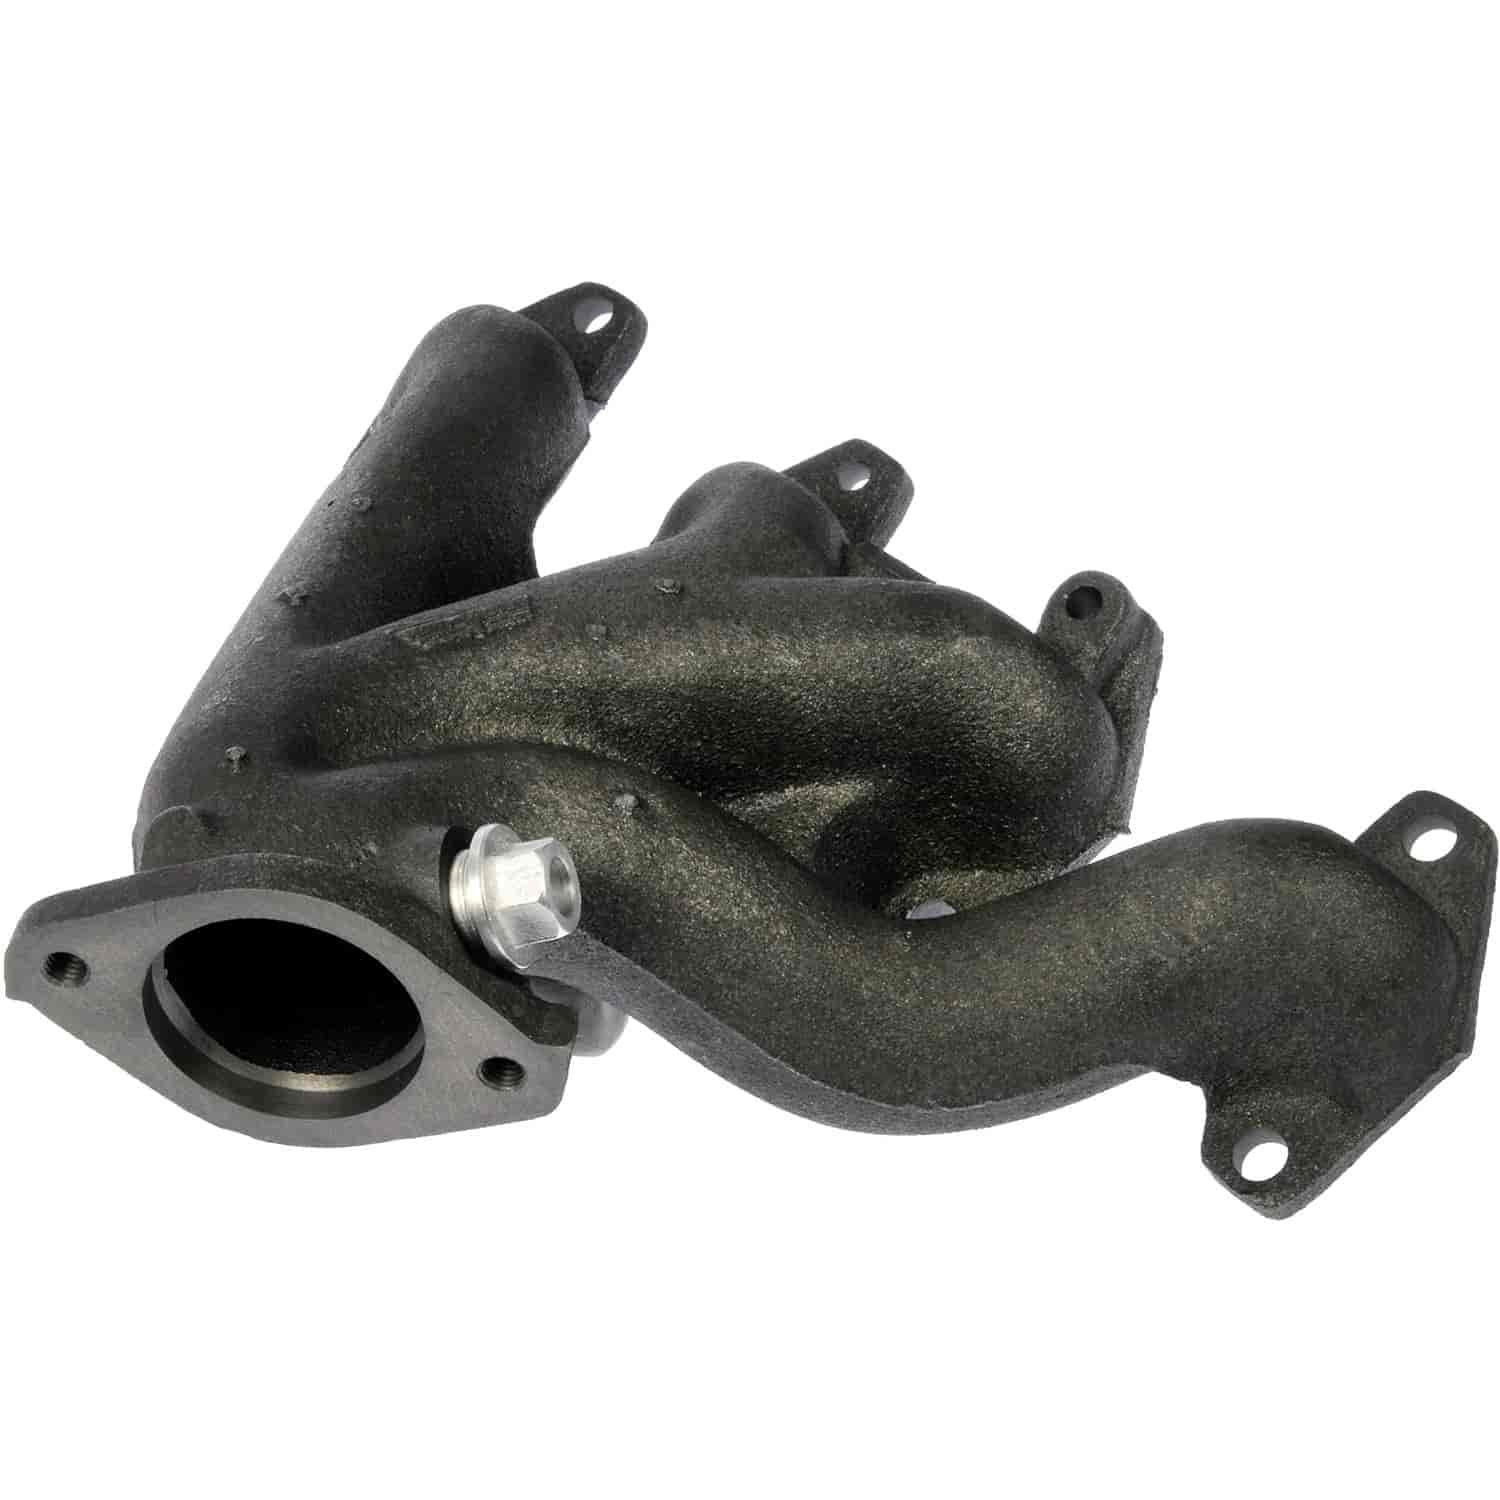 Exhaust Manifold Kit - Includes Required Gaskets and Hardware To Downpipe